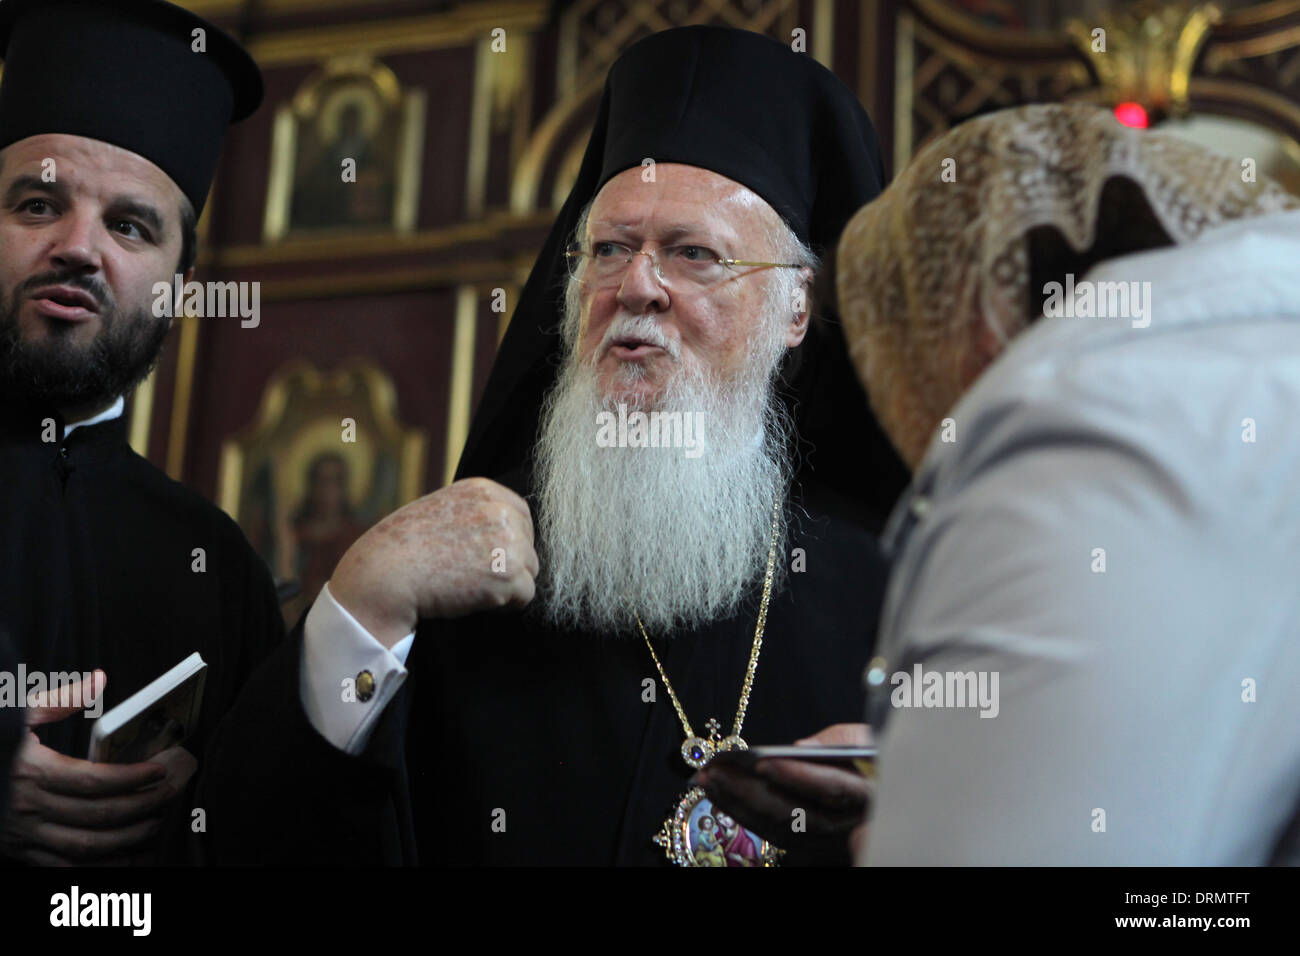 Patriarch Bartholomew I of Constantinople blesses to the Orthodox believers during his visit to Prague, Czech Republic. Stock Photo